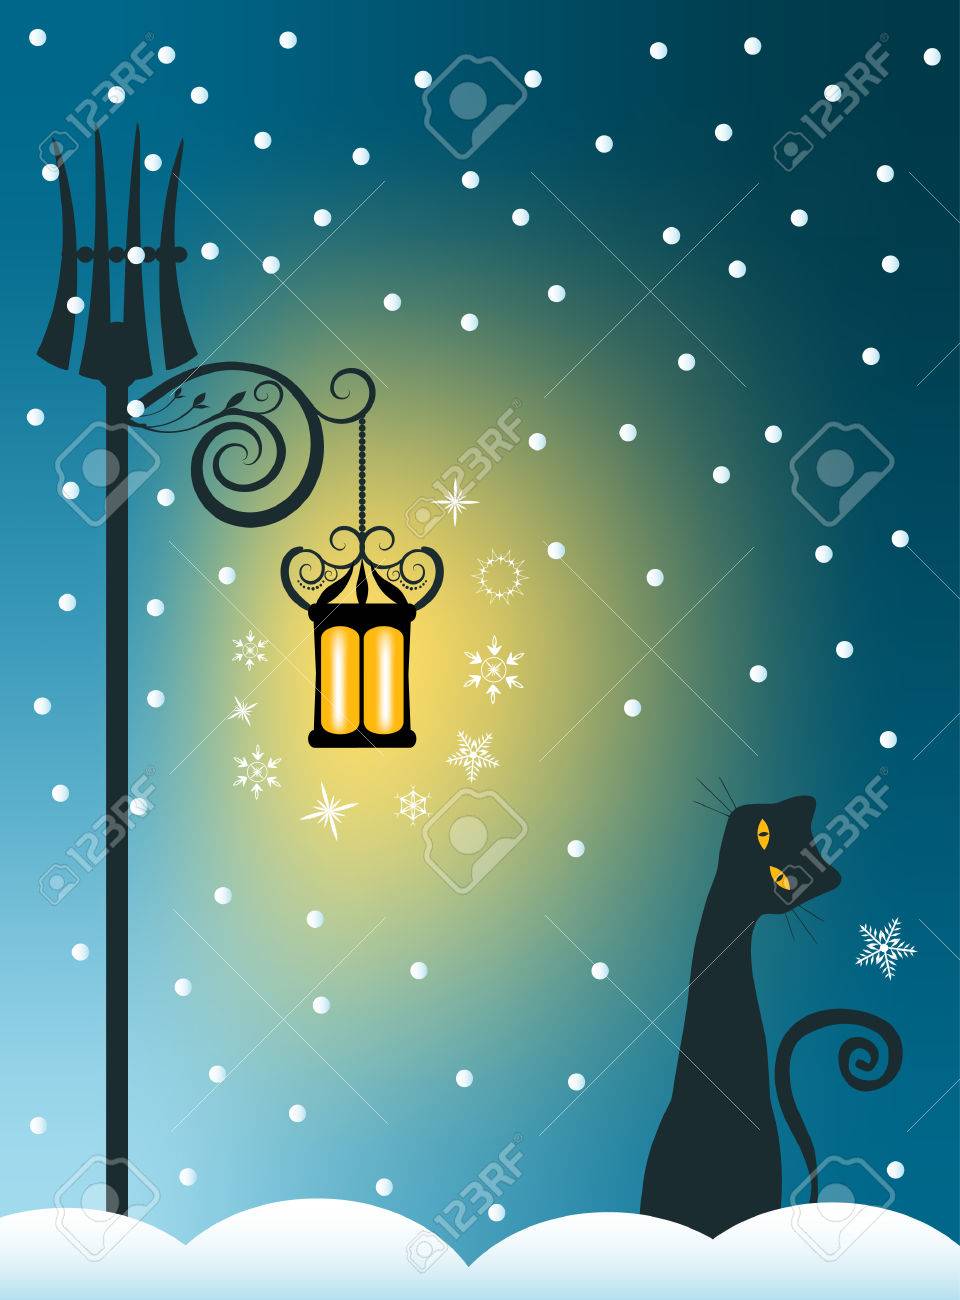 Whimsical Cat On Snowy Winter Background Royalty Cliparts